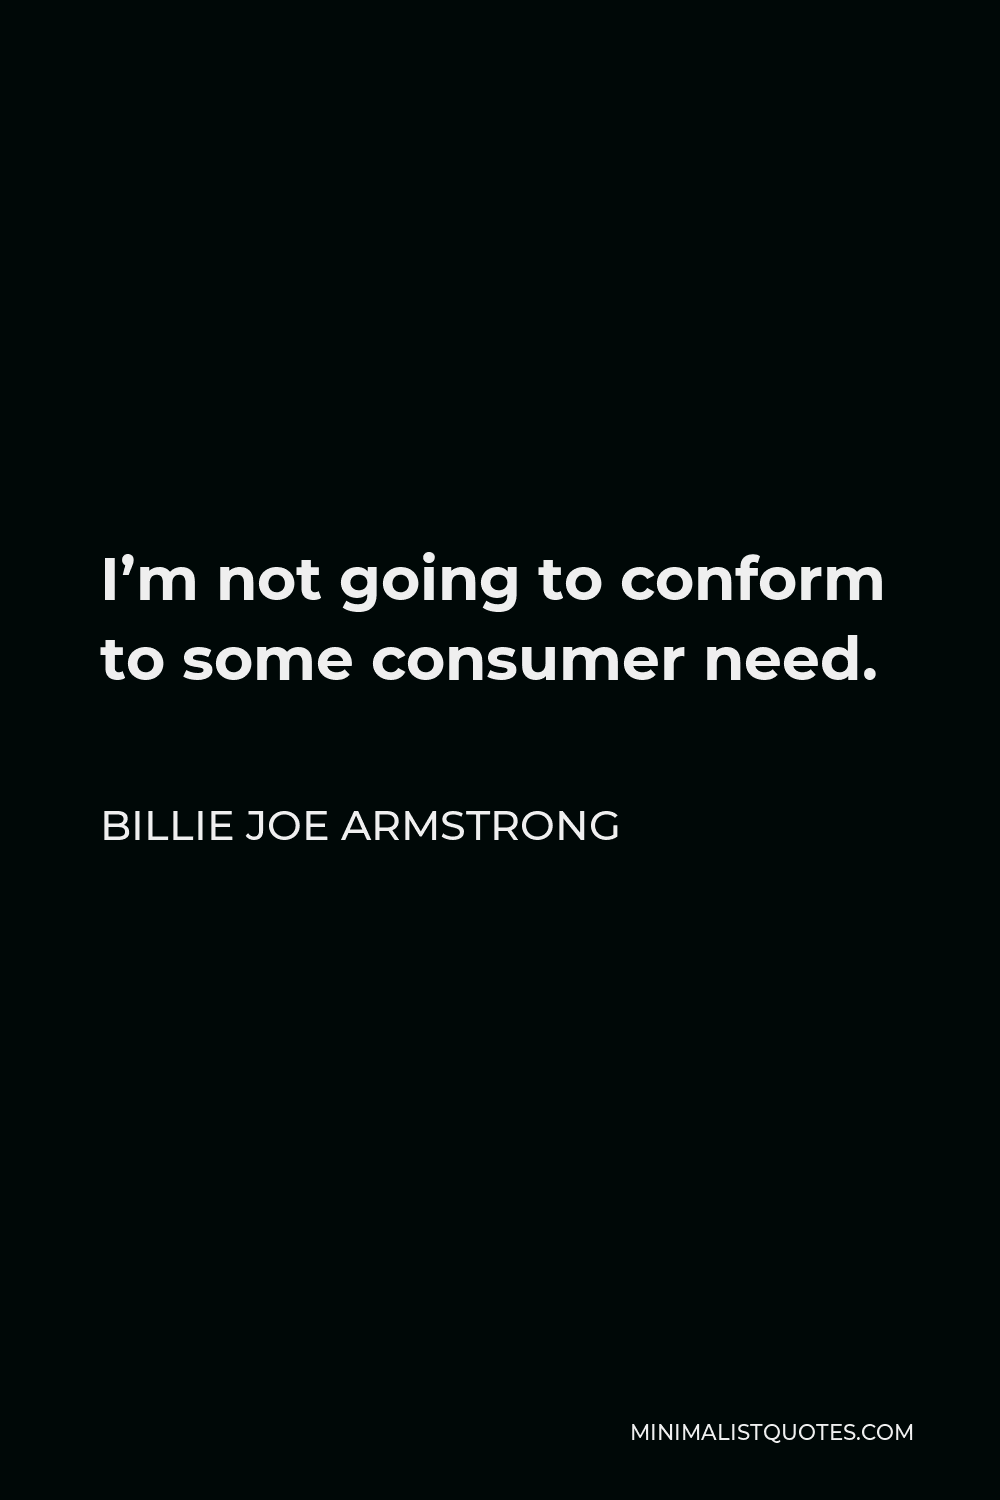 Billie Joe Armstrong Quote - I’m not going to conform to some consumer need.